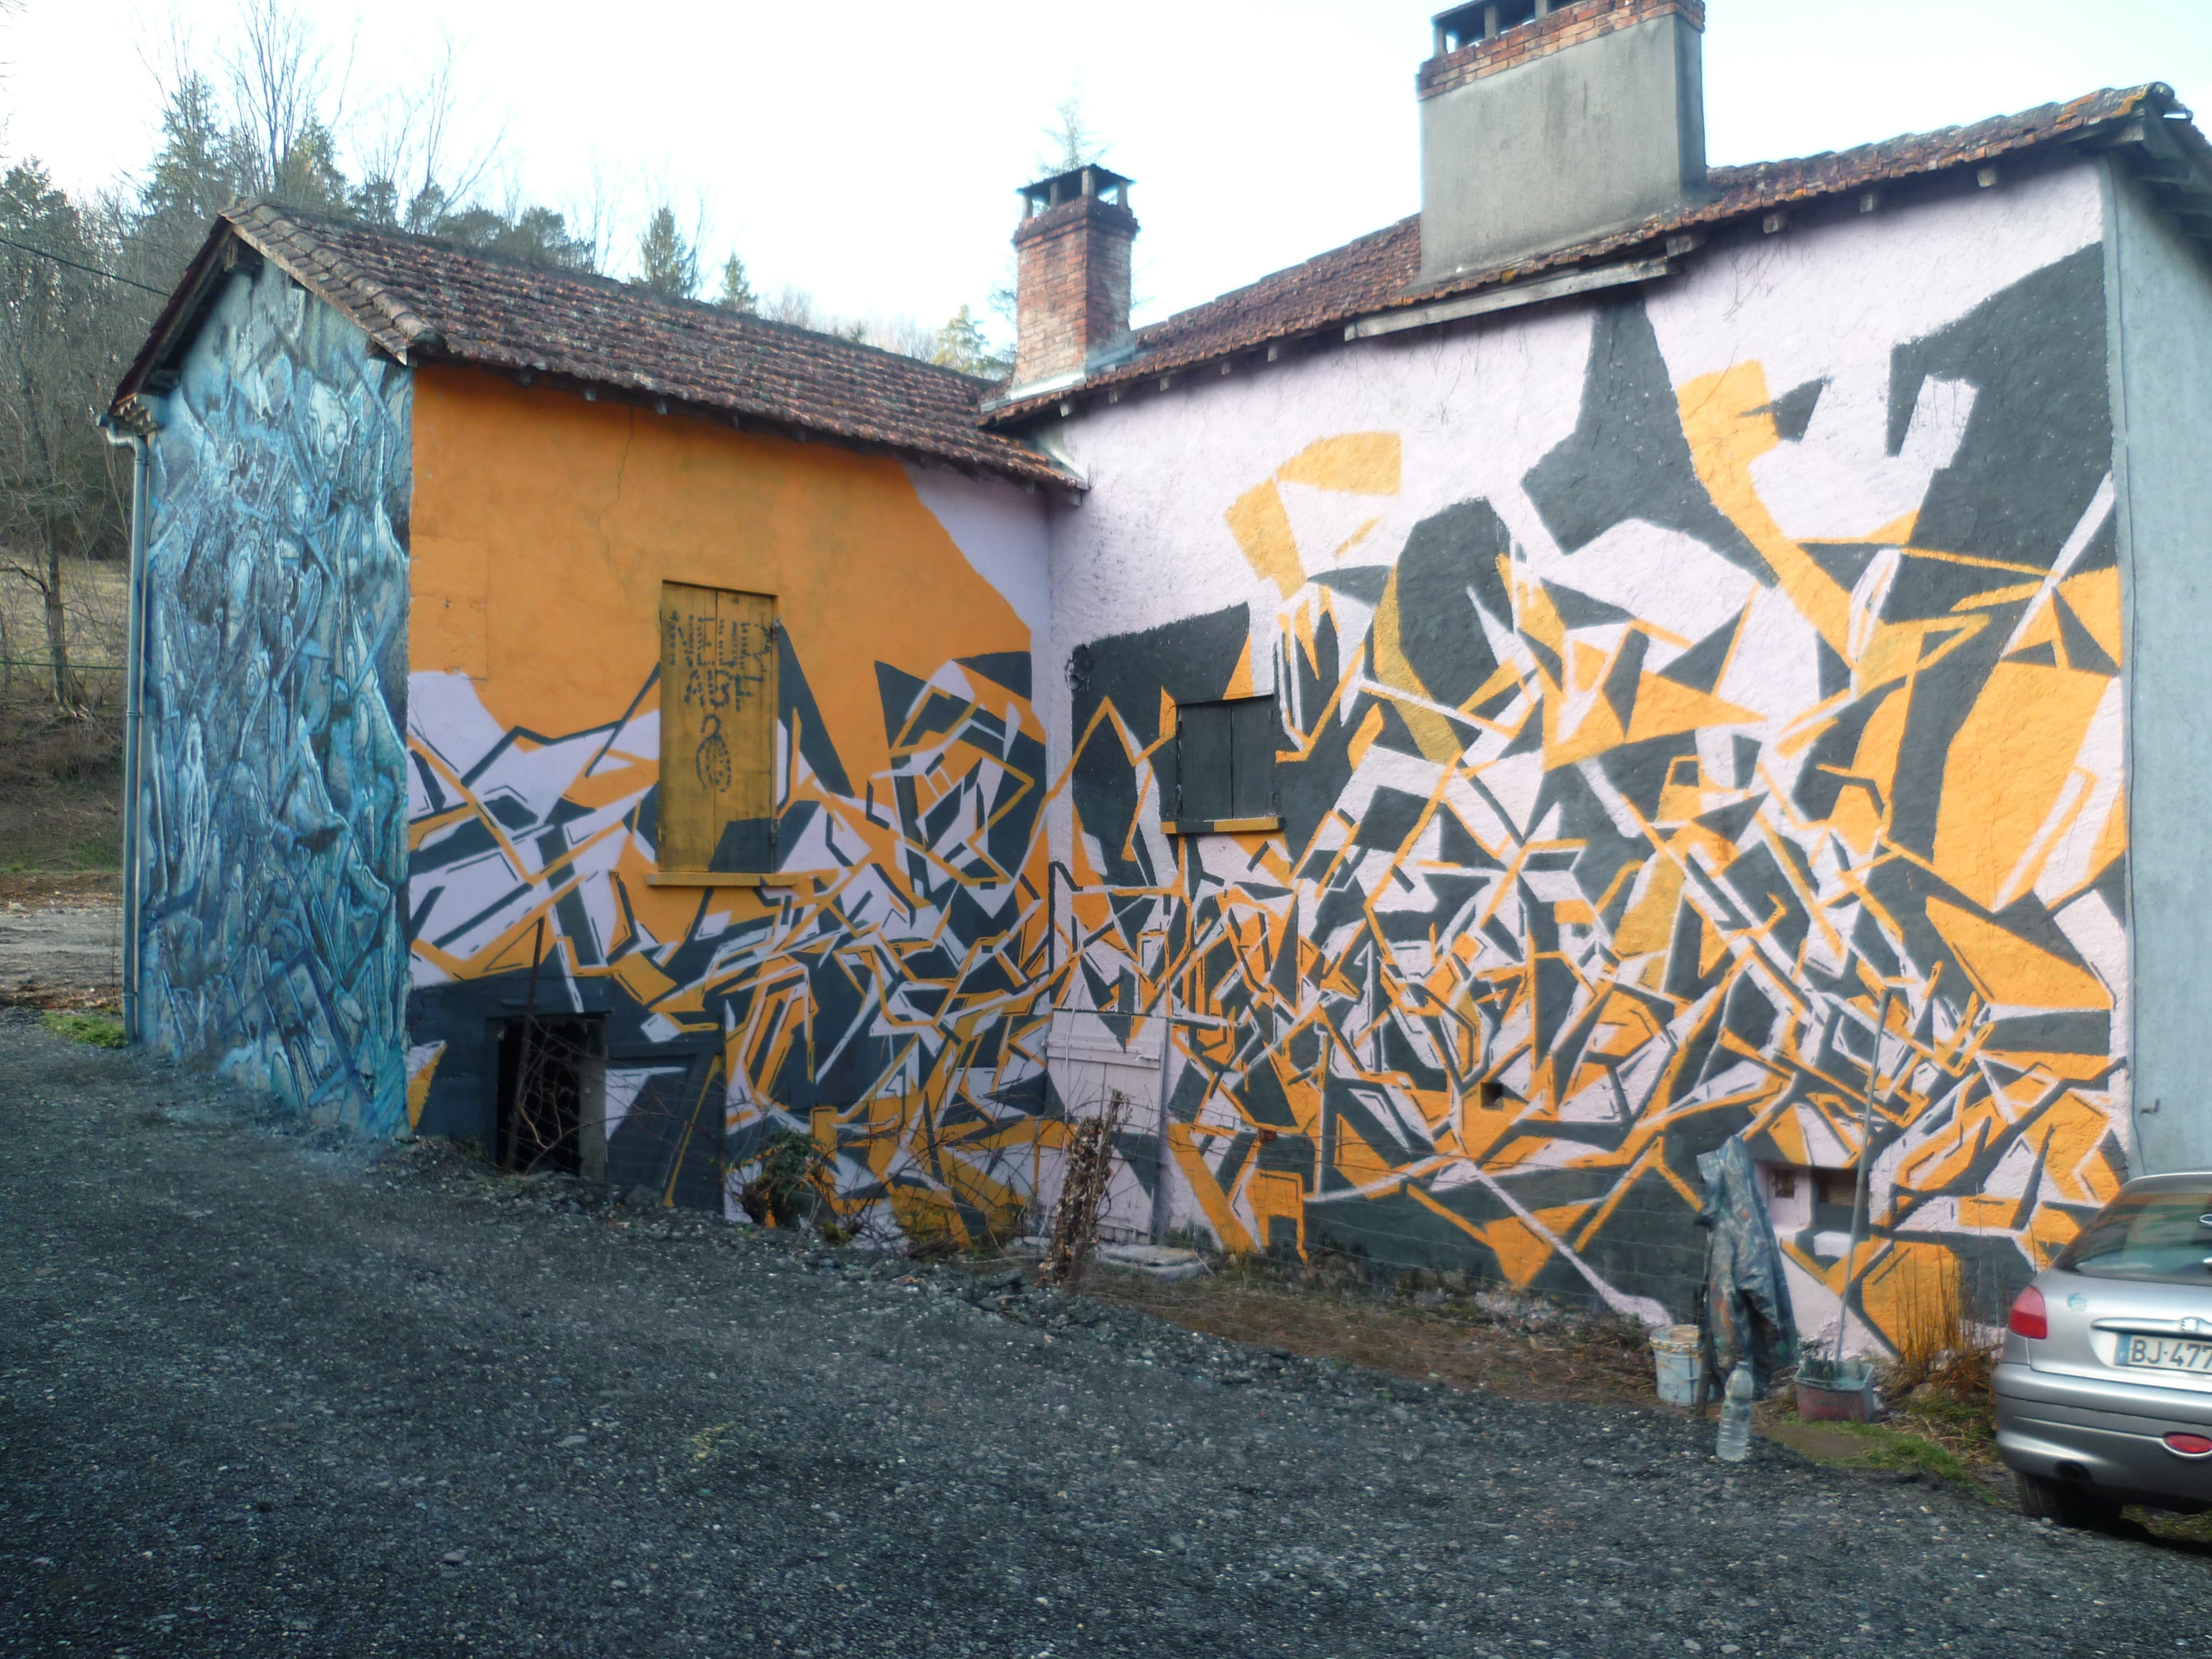 Graffiti 5652 #neurabf captured by Neur Abf in Champcevinel France